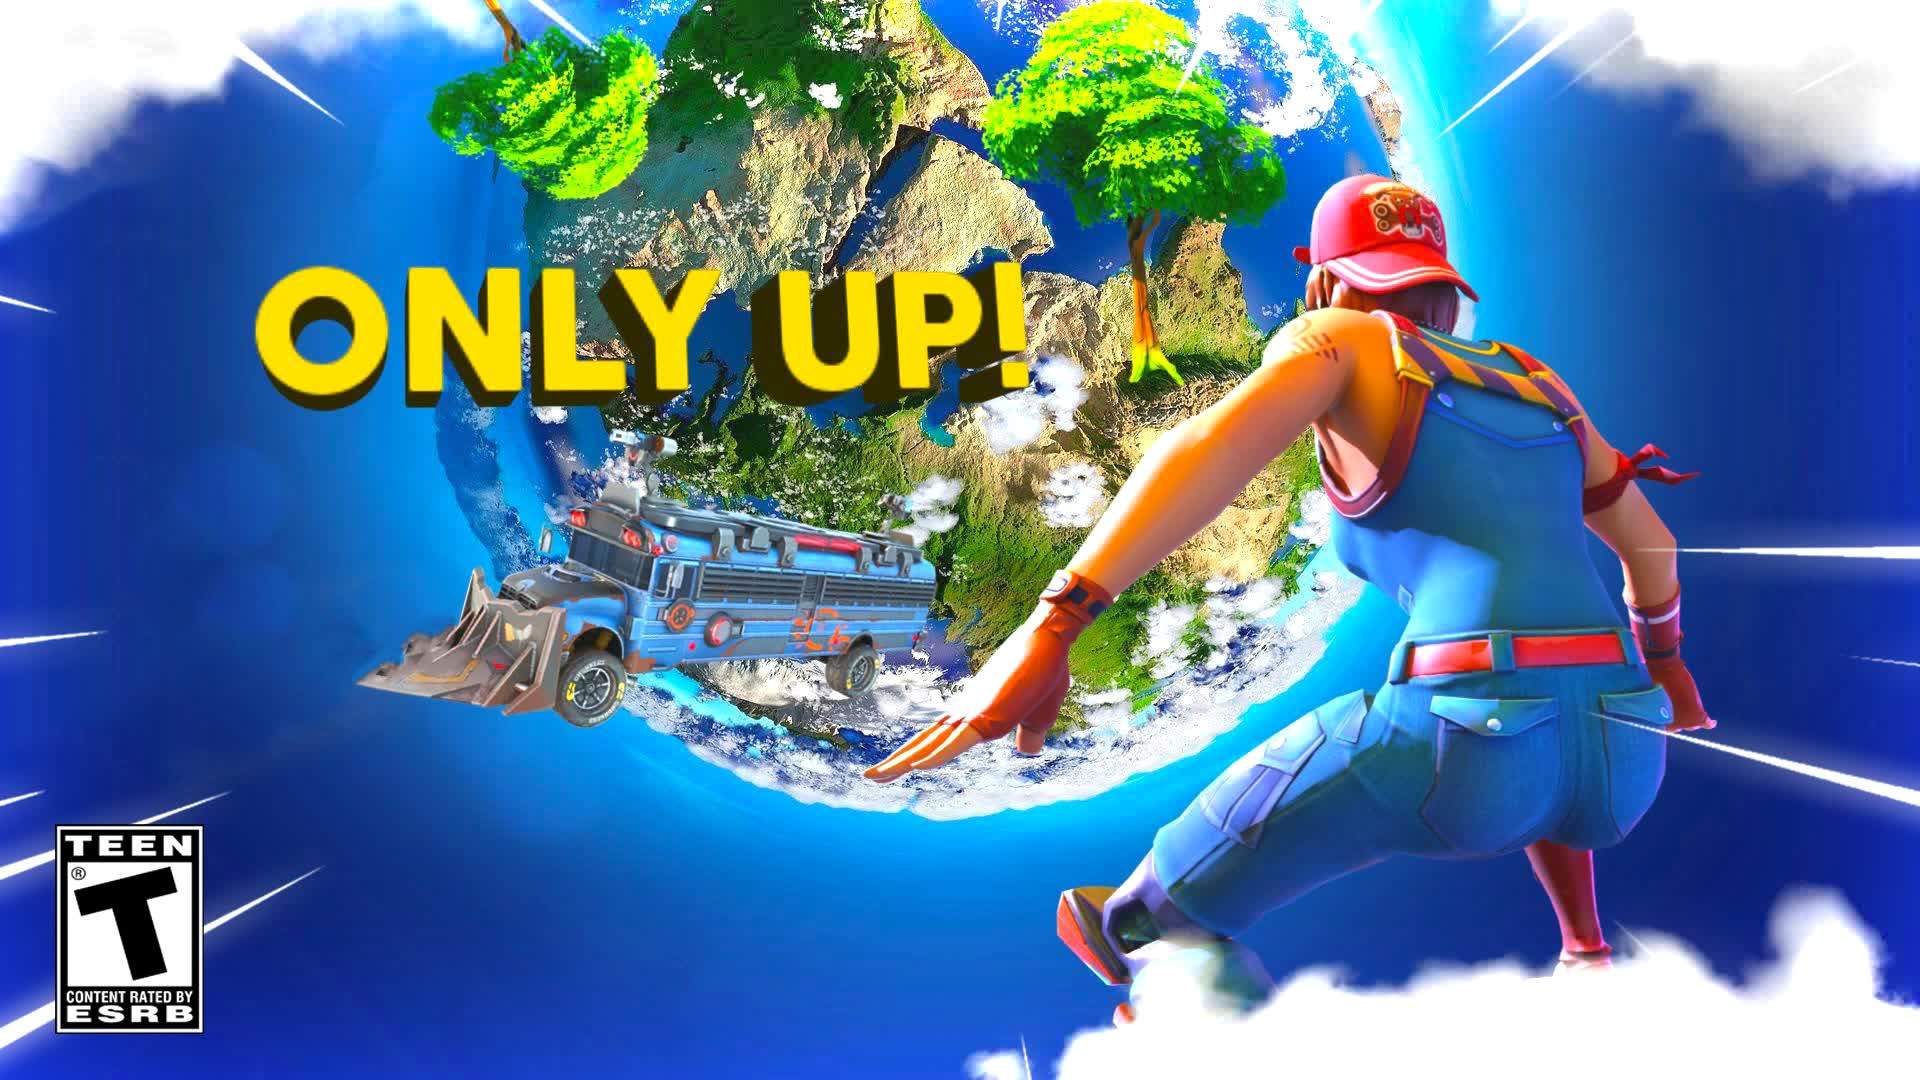 OnlyUp 🥳 For Noobs! - Fortnite Creative Map Code - Dropnite